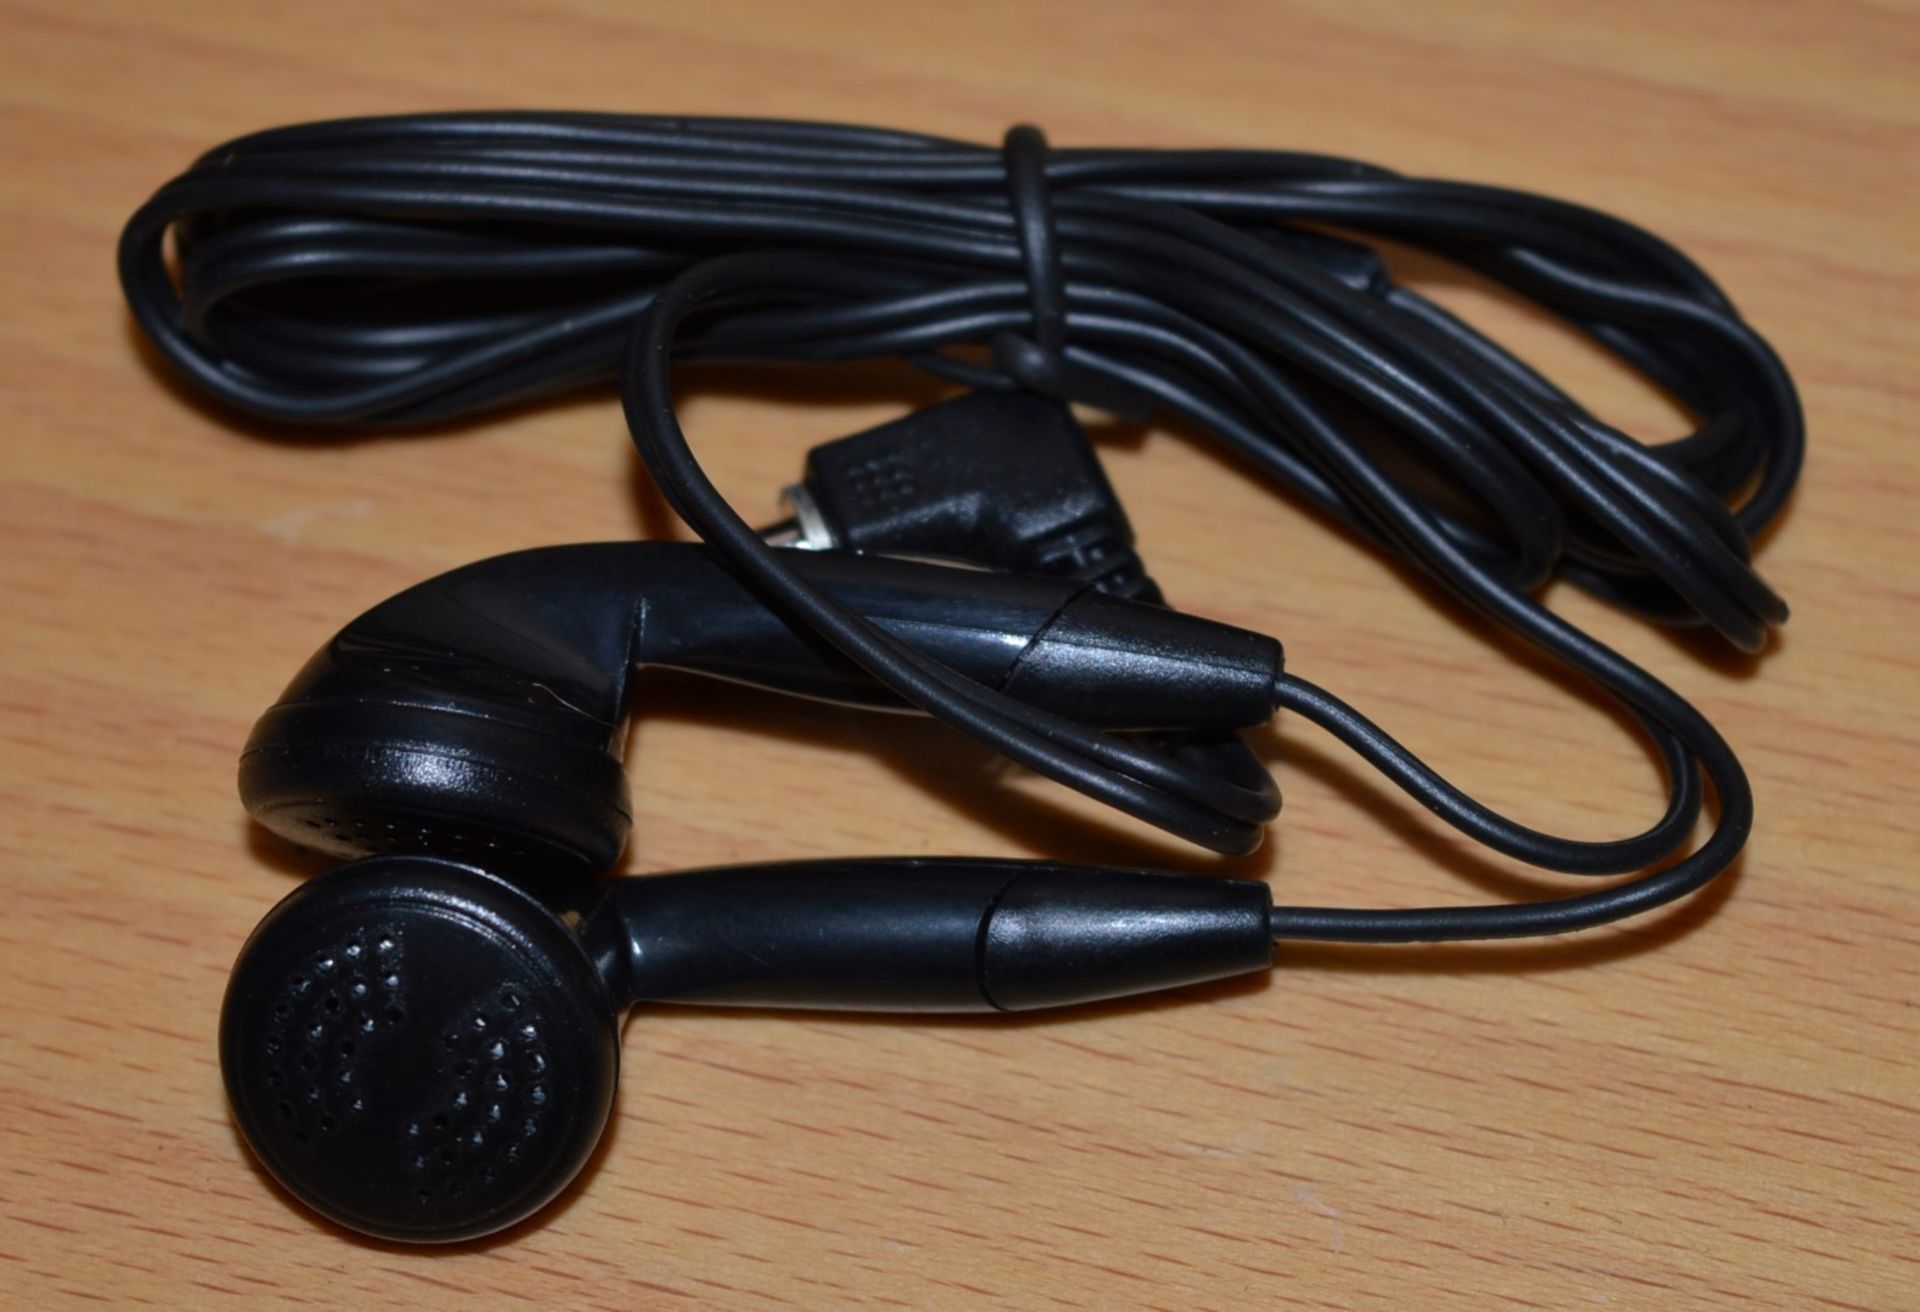 Approx 100 x Earbud Earphones - Type HL157 - 3.5mm Stereo Mini Plug - 32OHM - 107dB - New and Unused